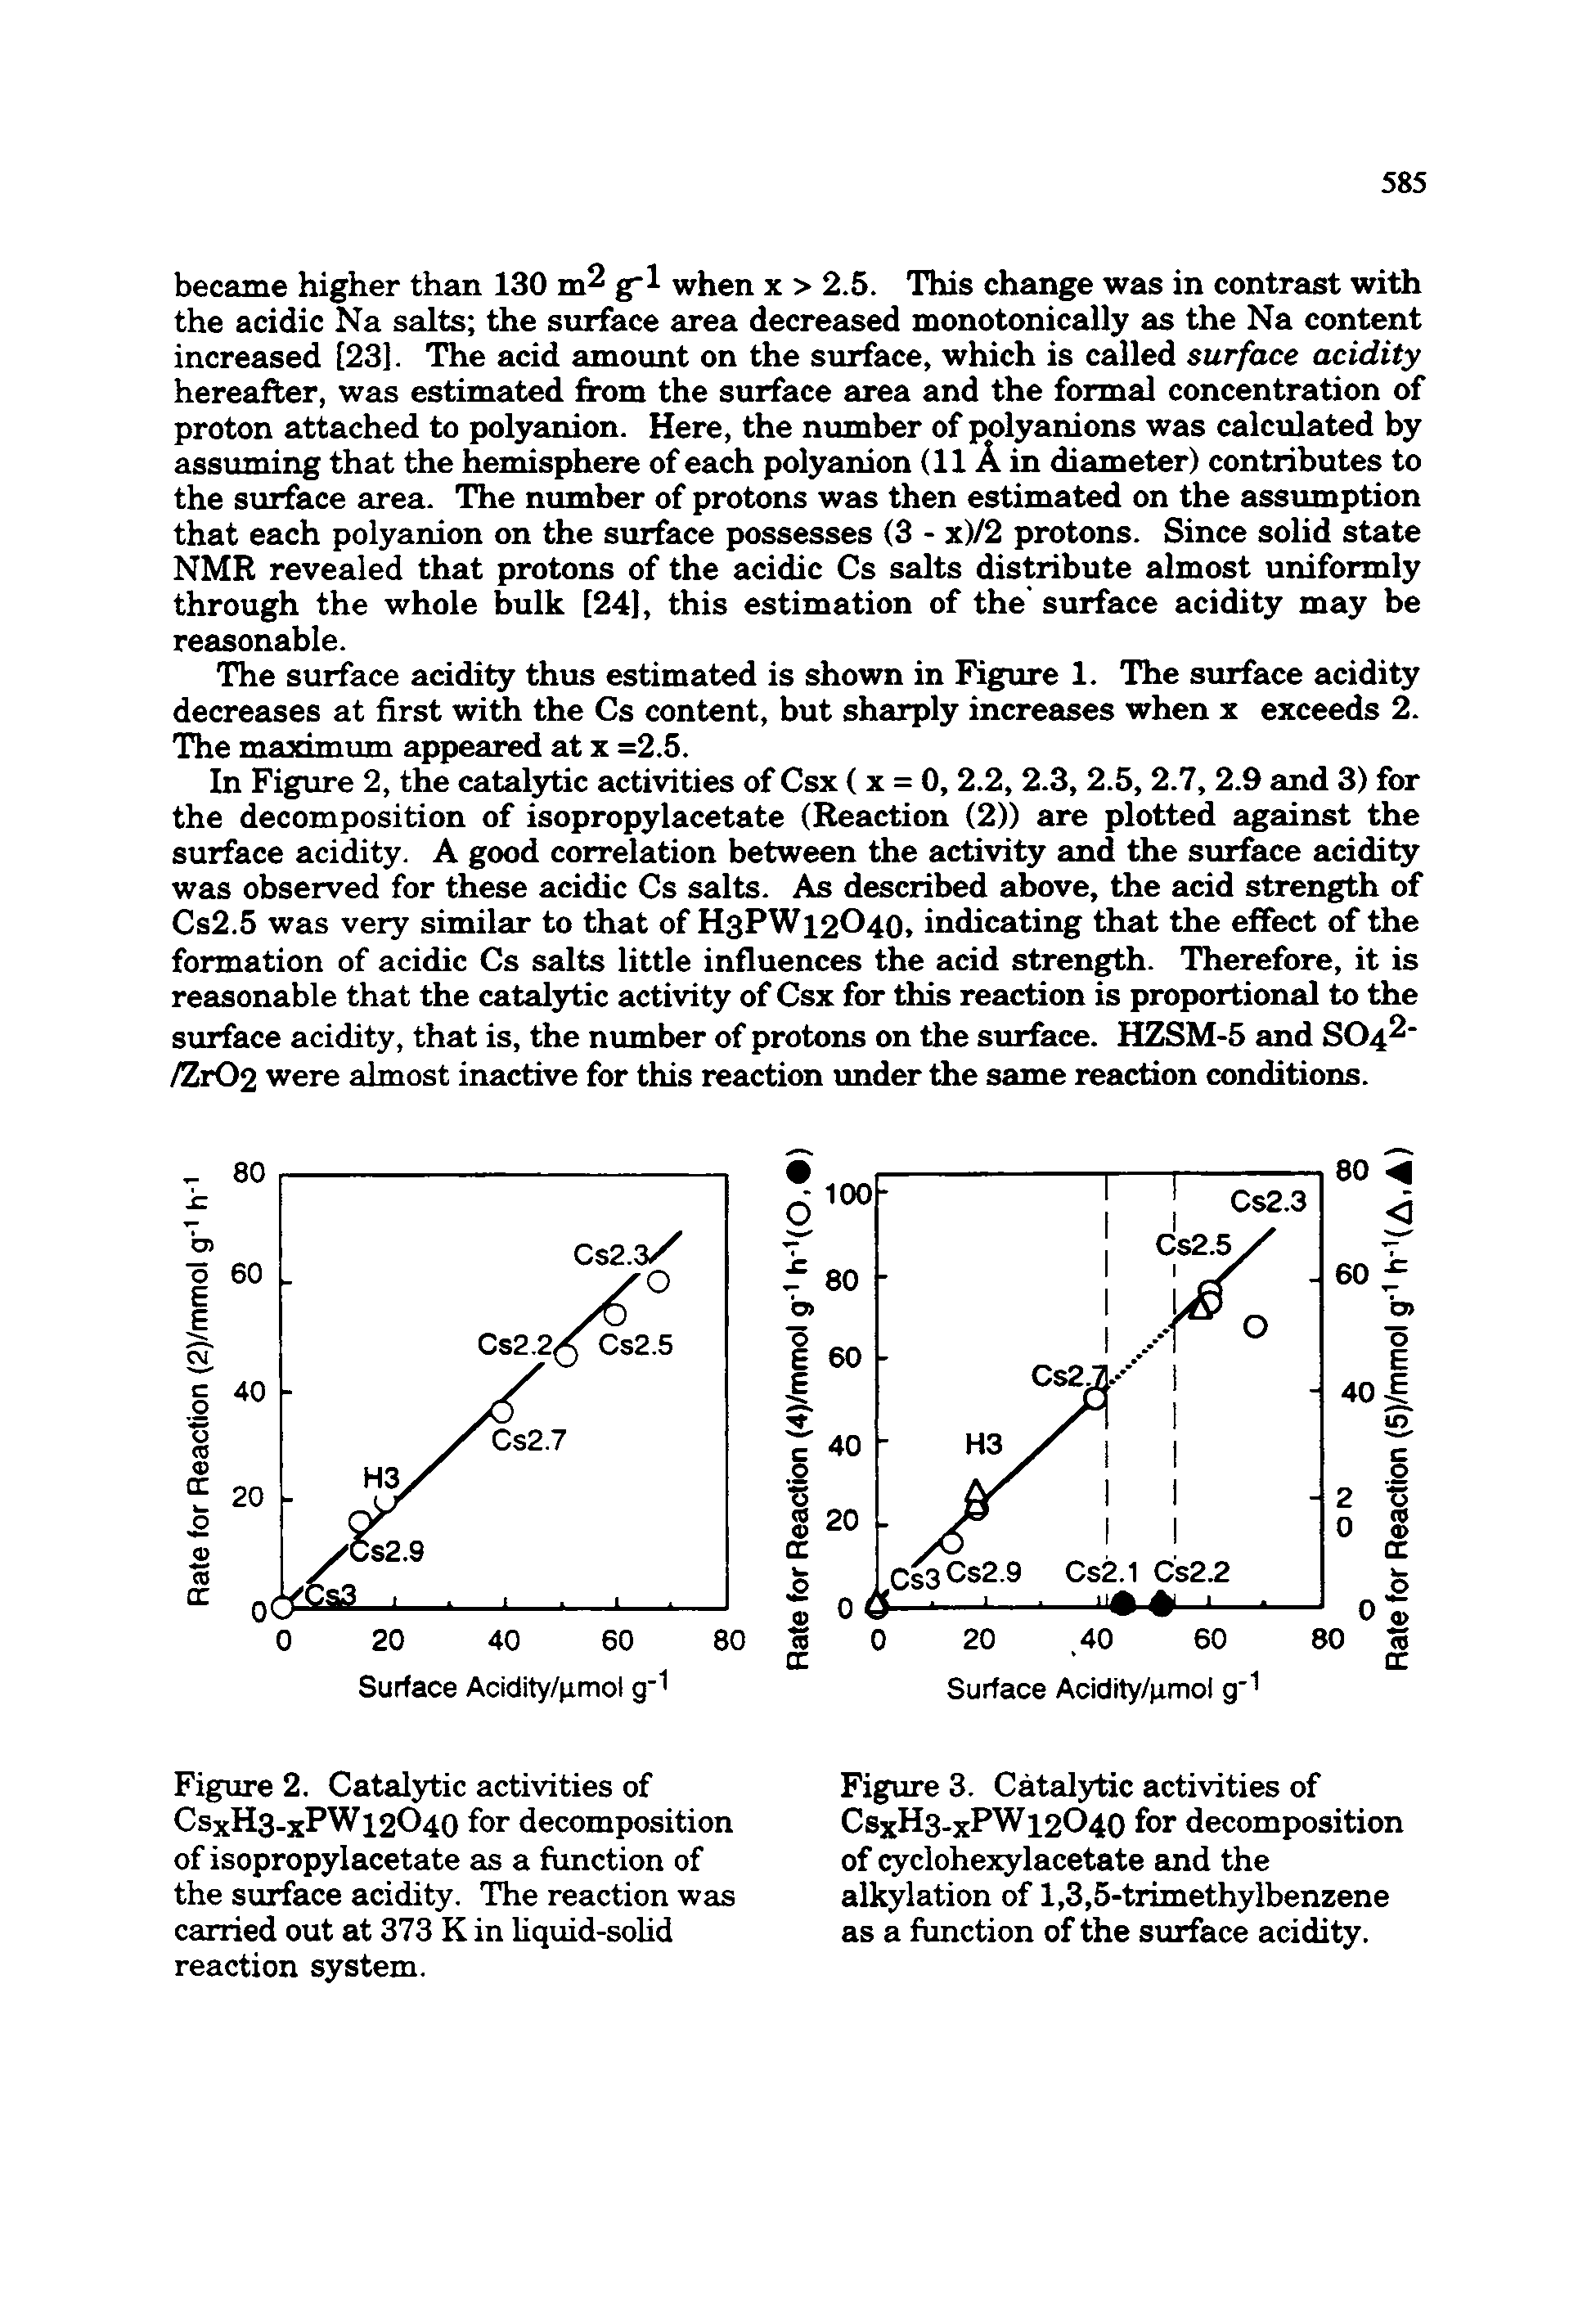 Figure 2. Catalytic activities of CsxH3-xPWi2O40 for decomposition of isopropylacetate as a function of the surface acidity. The reaction was carried out at 373 K in liquid-solid reaction system.